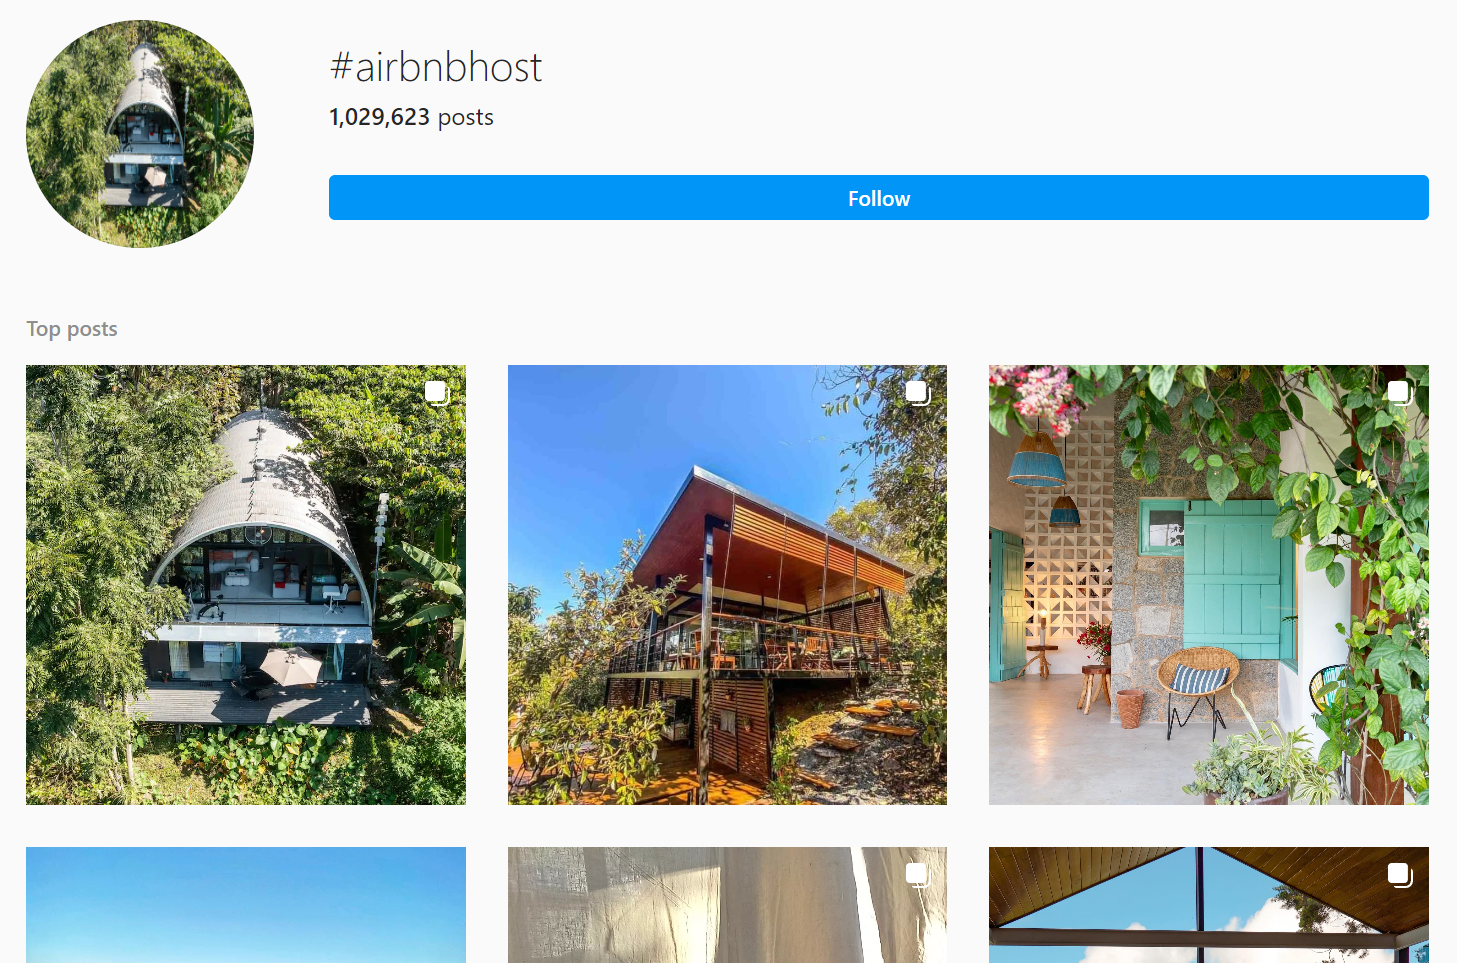 A screenshot of posts mentioned under #airbnbhost